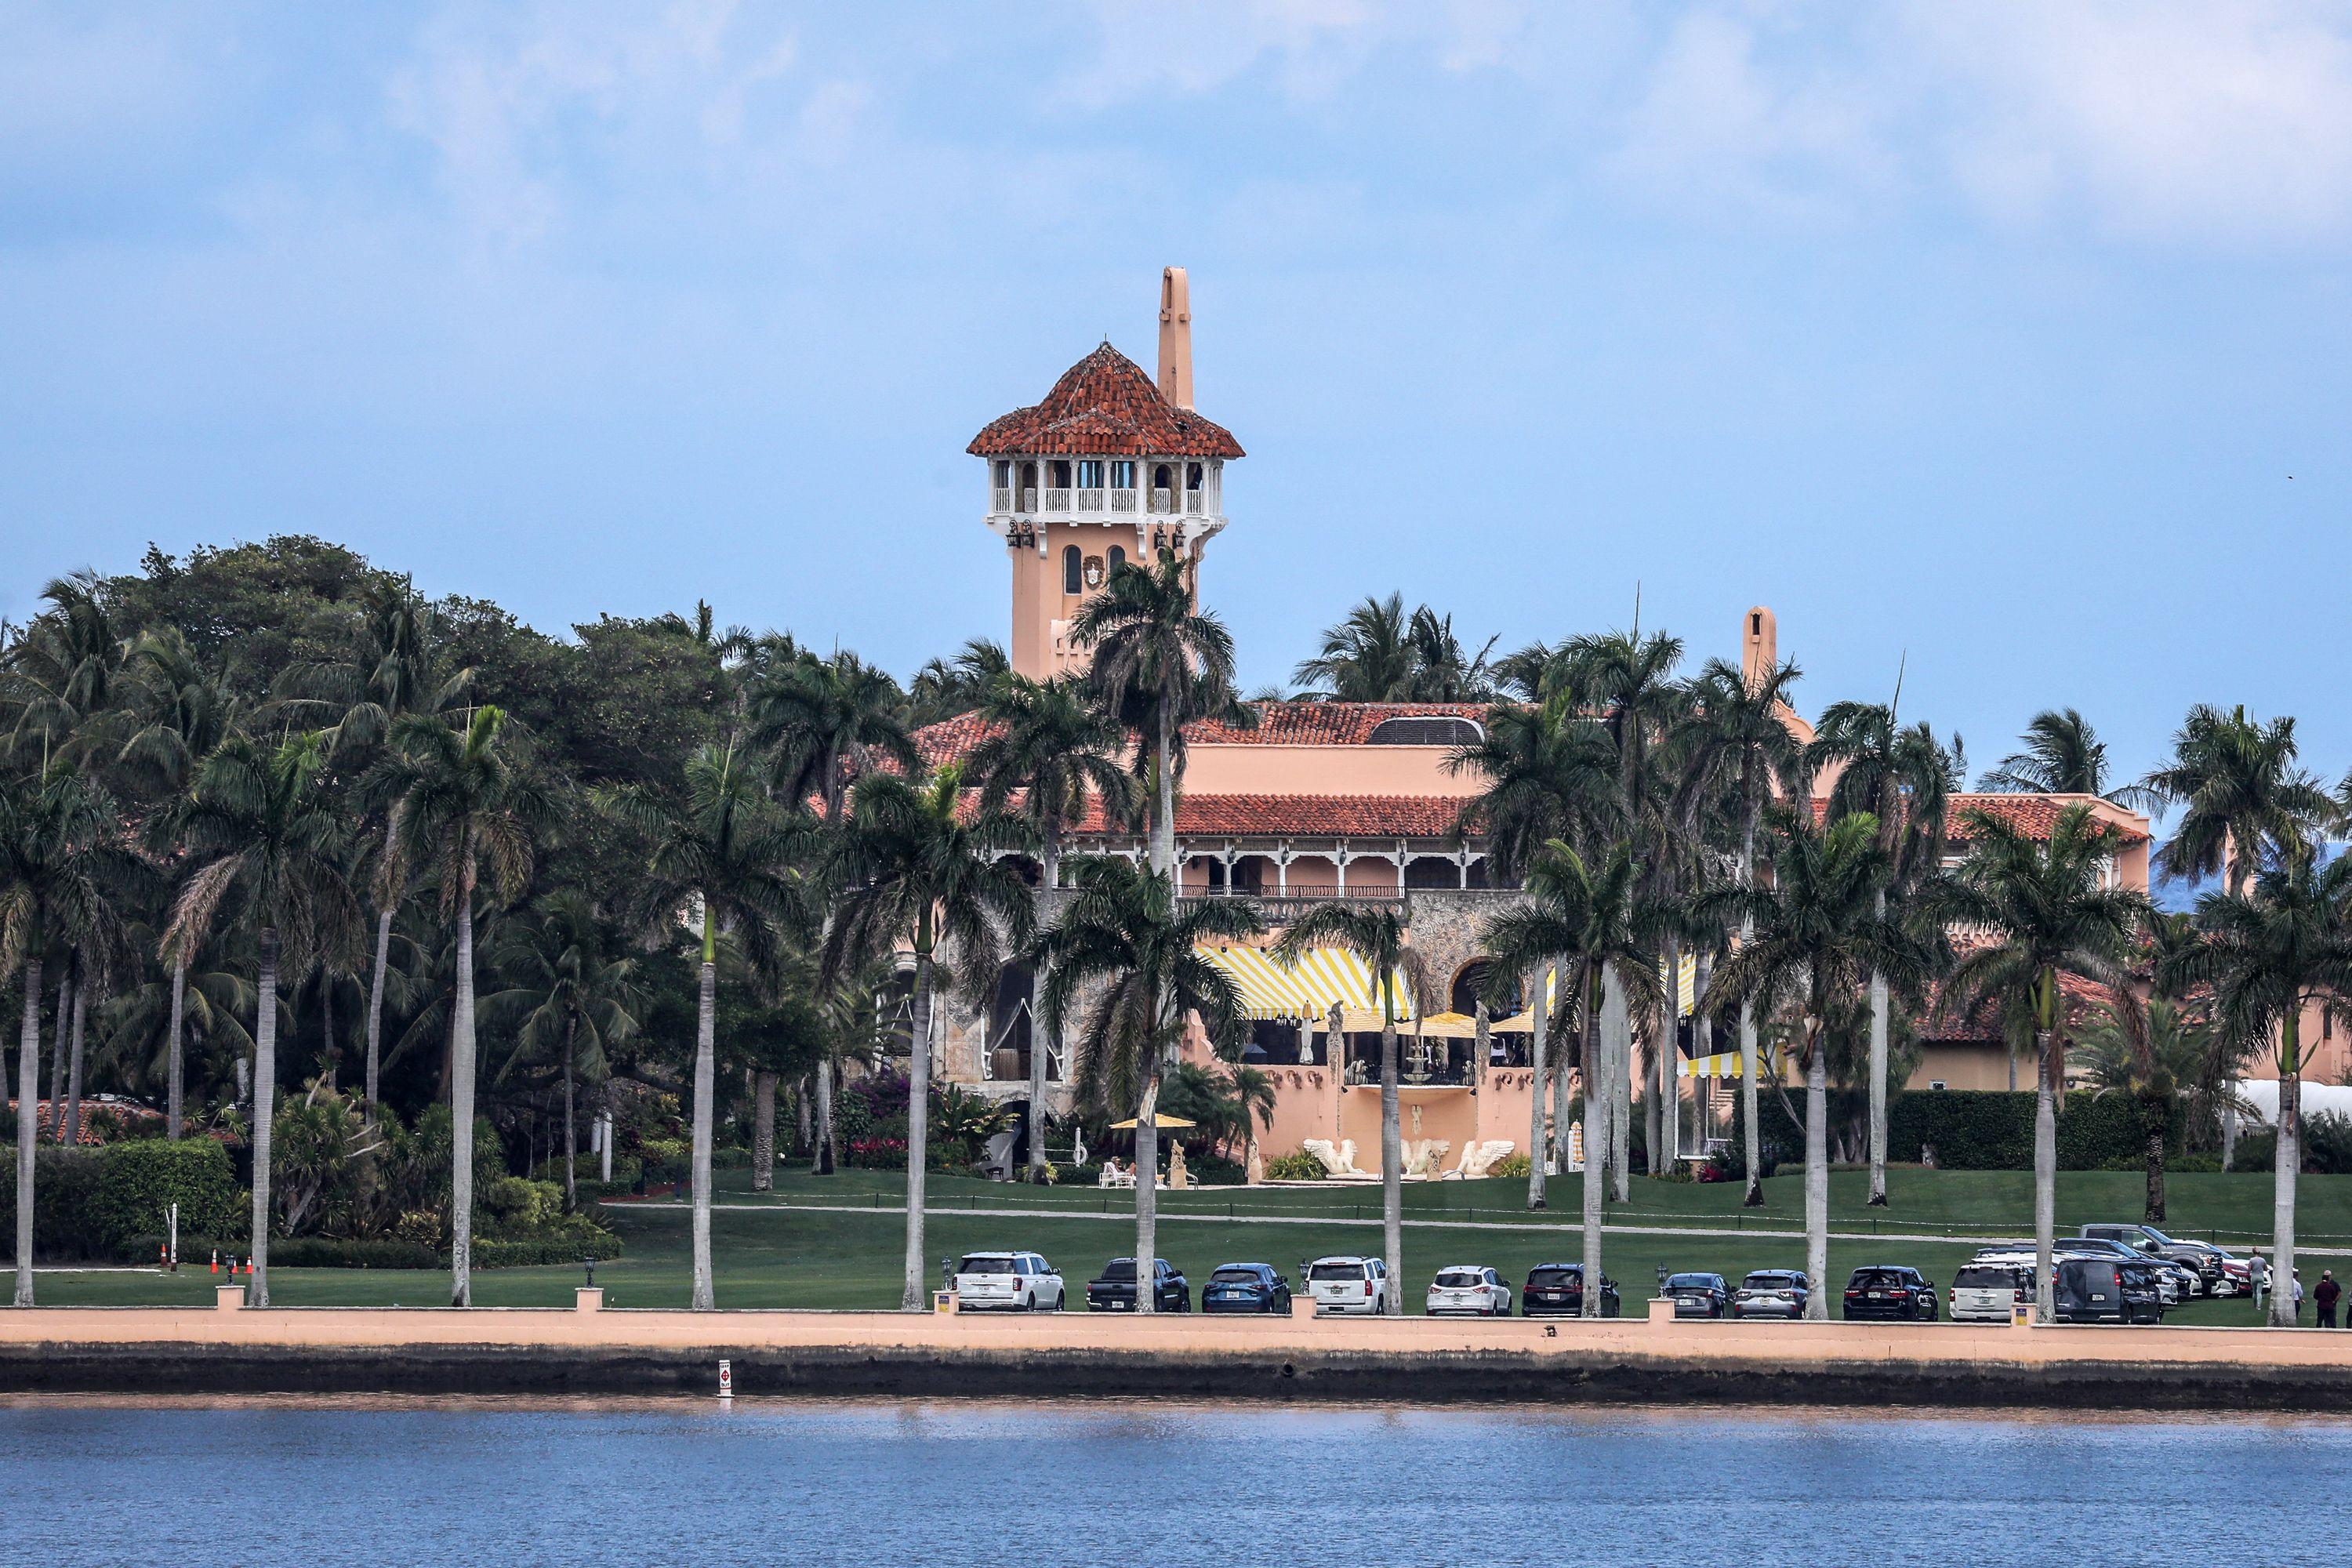 Palm trees line a water view of Mar-a-Lago.